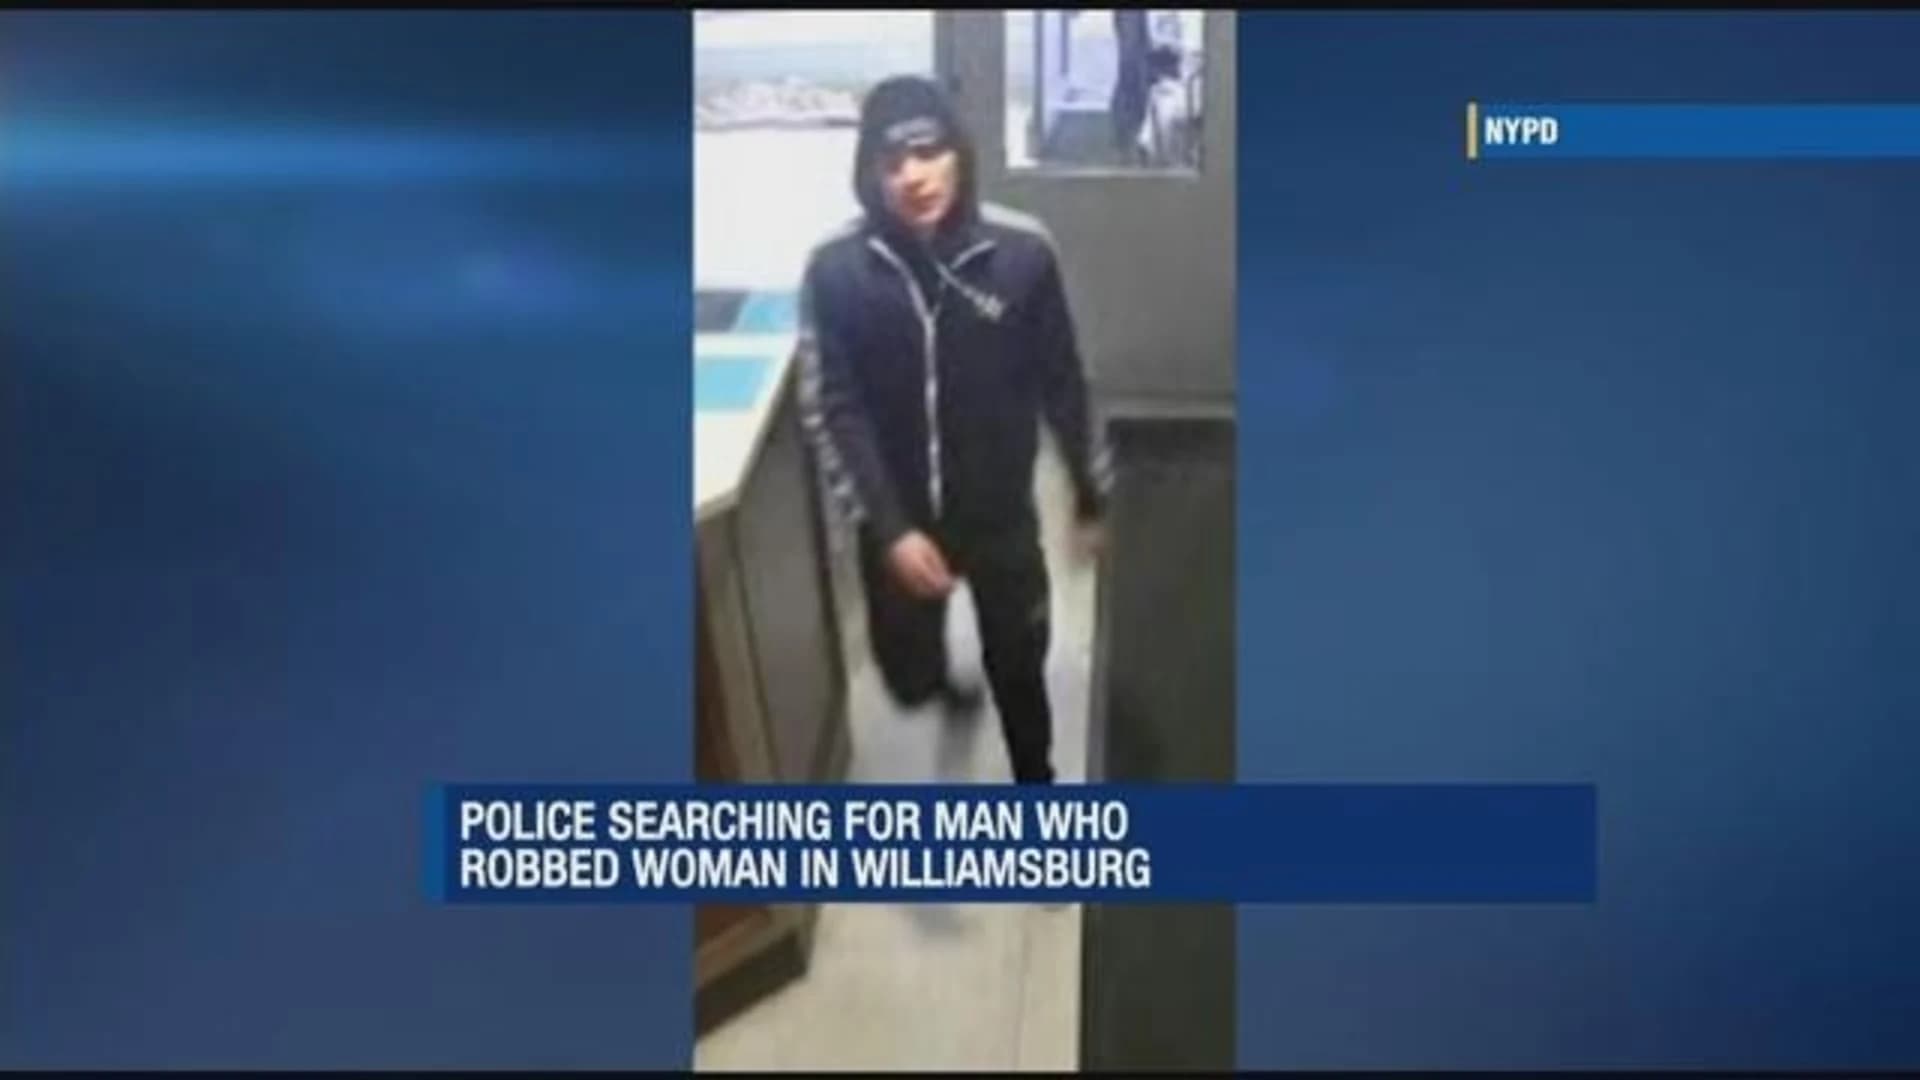 Police: Woman approached from behind, robbed of phone in subway station